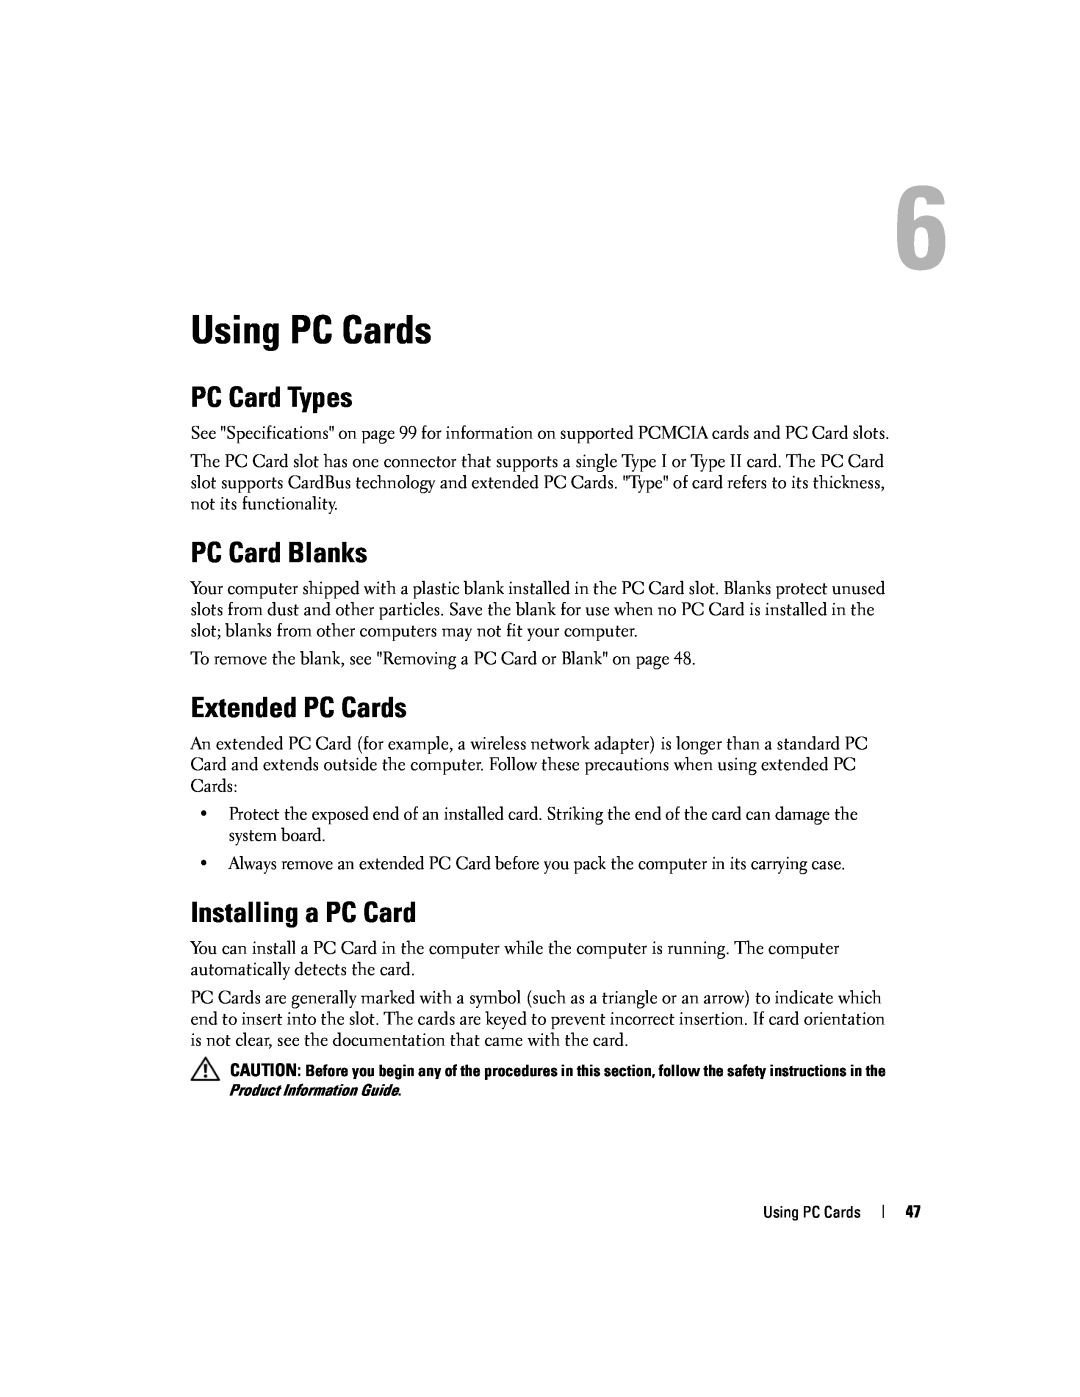 Dell 9300 owner manual Using PC Cards, PC Card Types, PC Card Blanks, Extended PC Cards, Installing a PC Card 